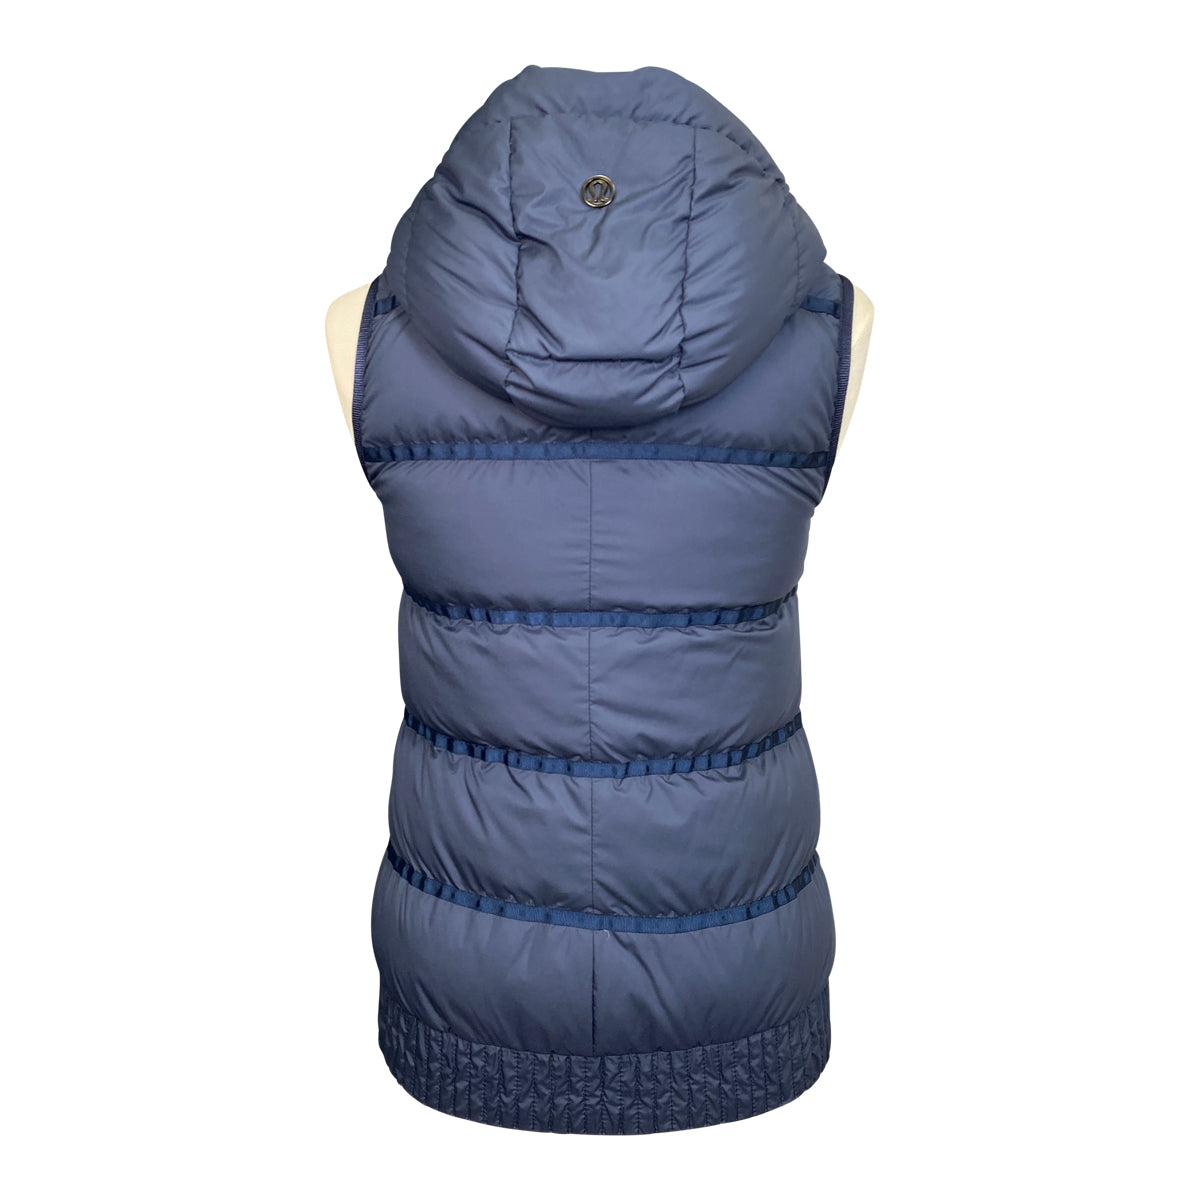 Lululemon 'Chilly Chill' Puffy Vest in Navy w/White Pattern